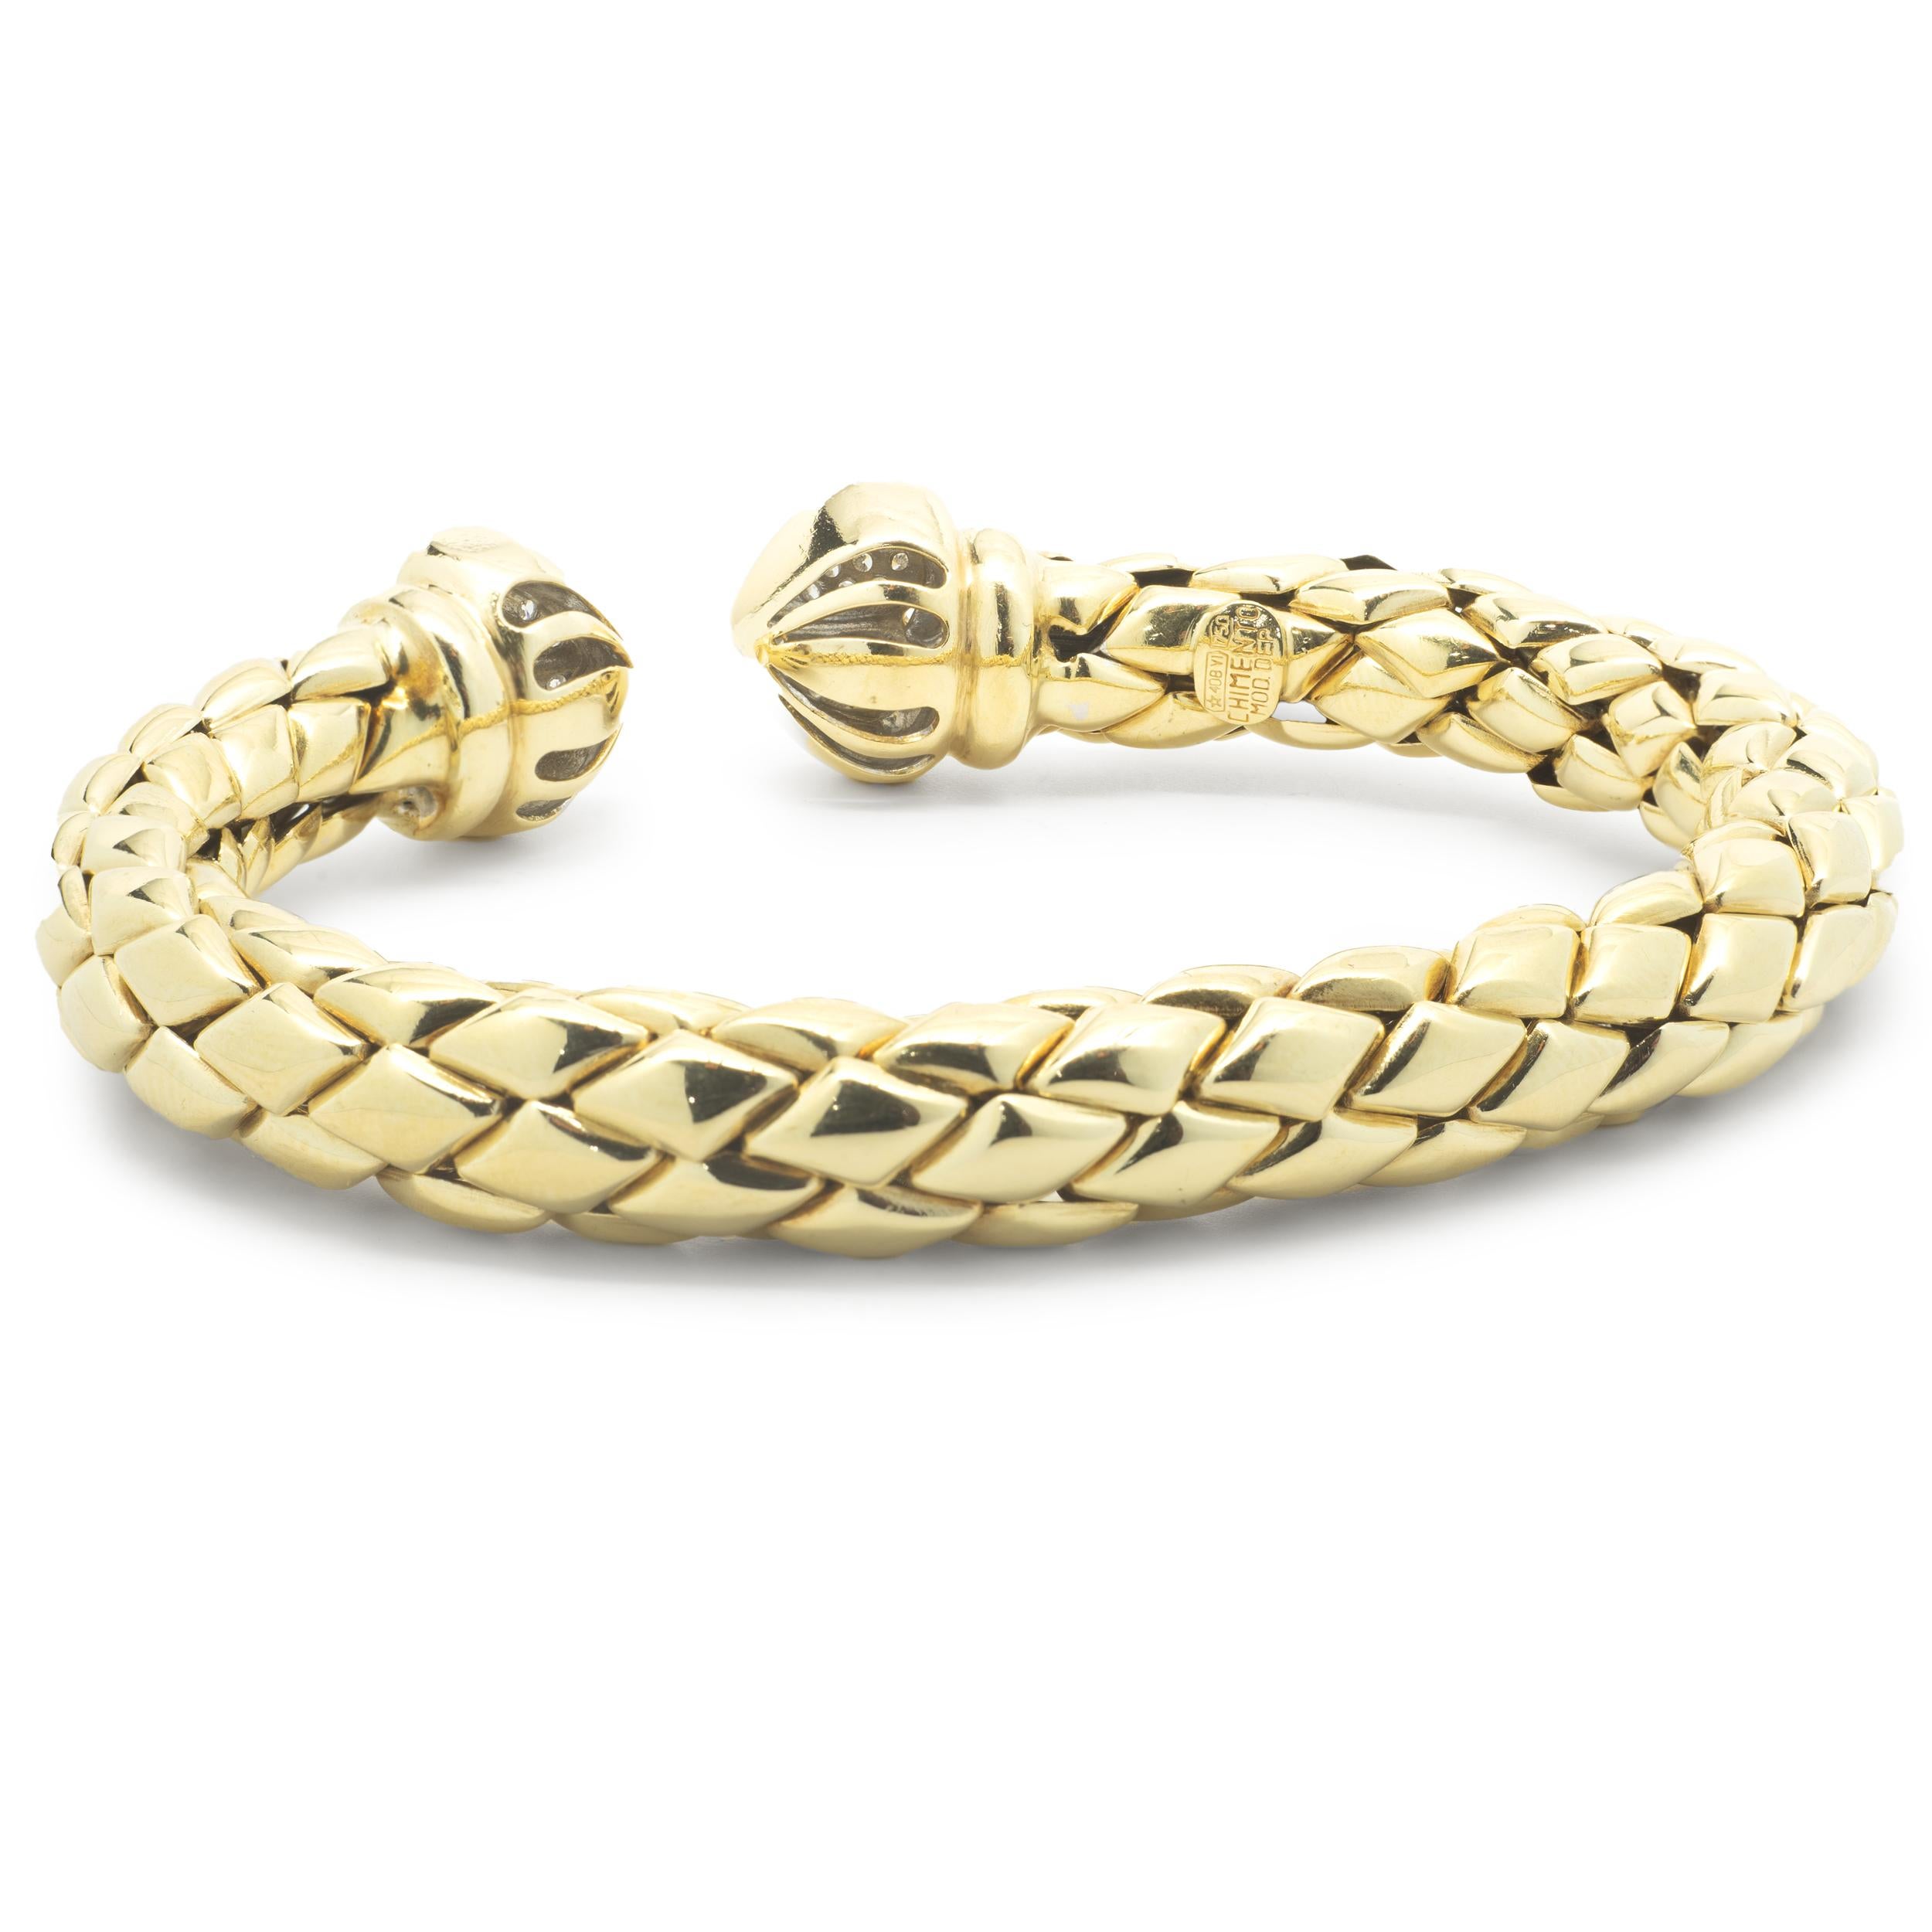 Designer: Chimento
Material: 18k yellow gold 
Diamond: 44 round brilliant = .50cttw
Color: G
Clarity: VS
Dimensions: bracelet will fit a 6 ½ -inch wrist and it is 8.52mm wide
Weight: 49.68 grams
